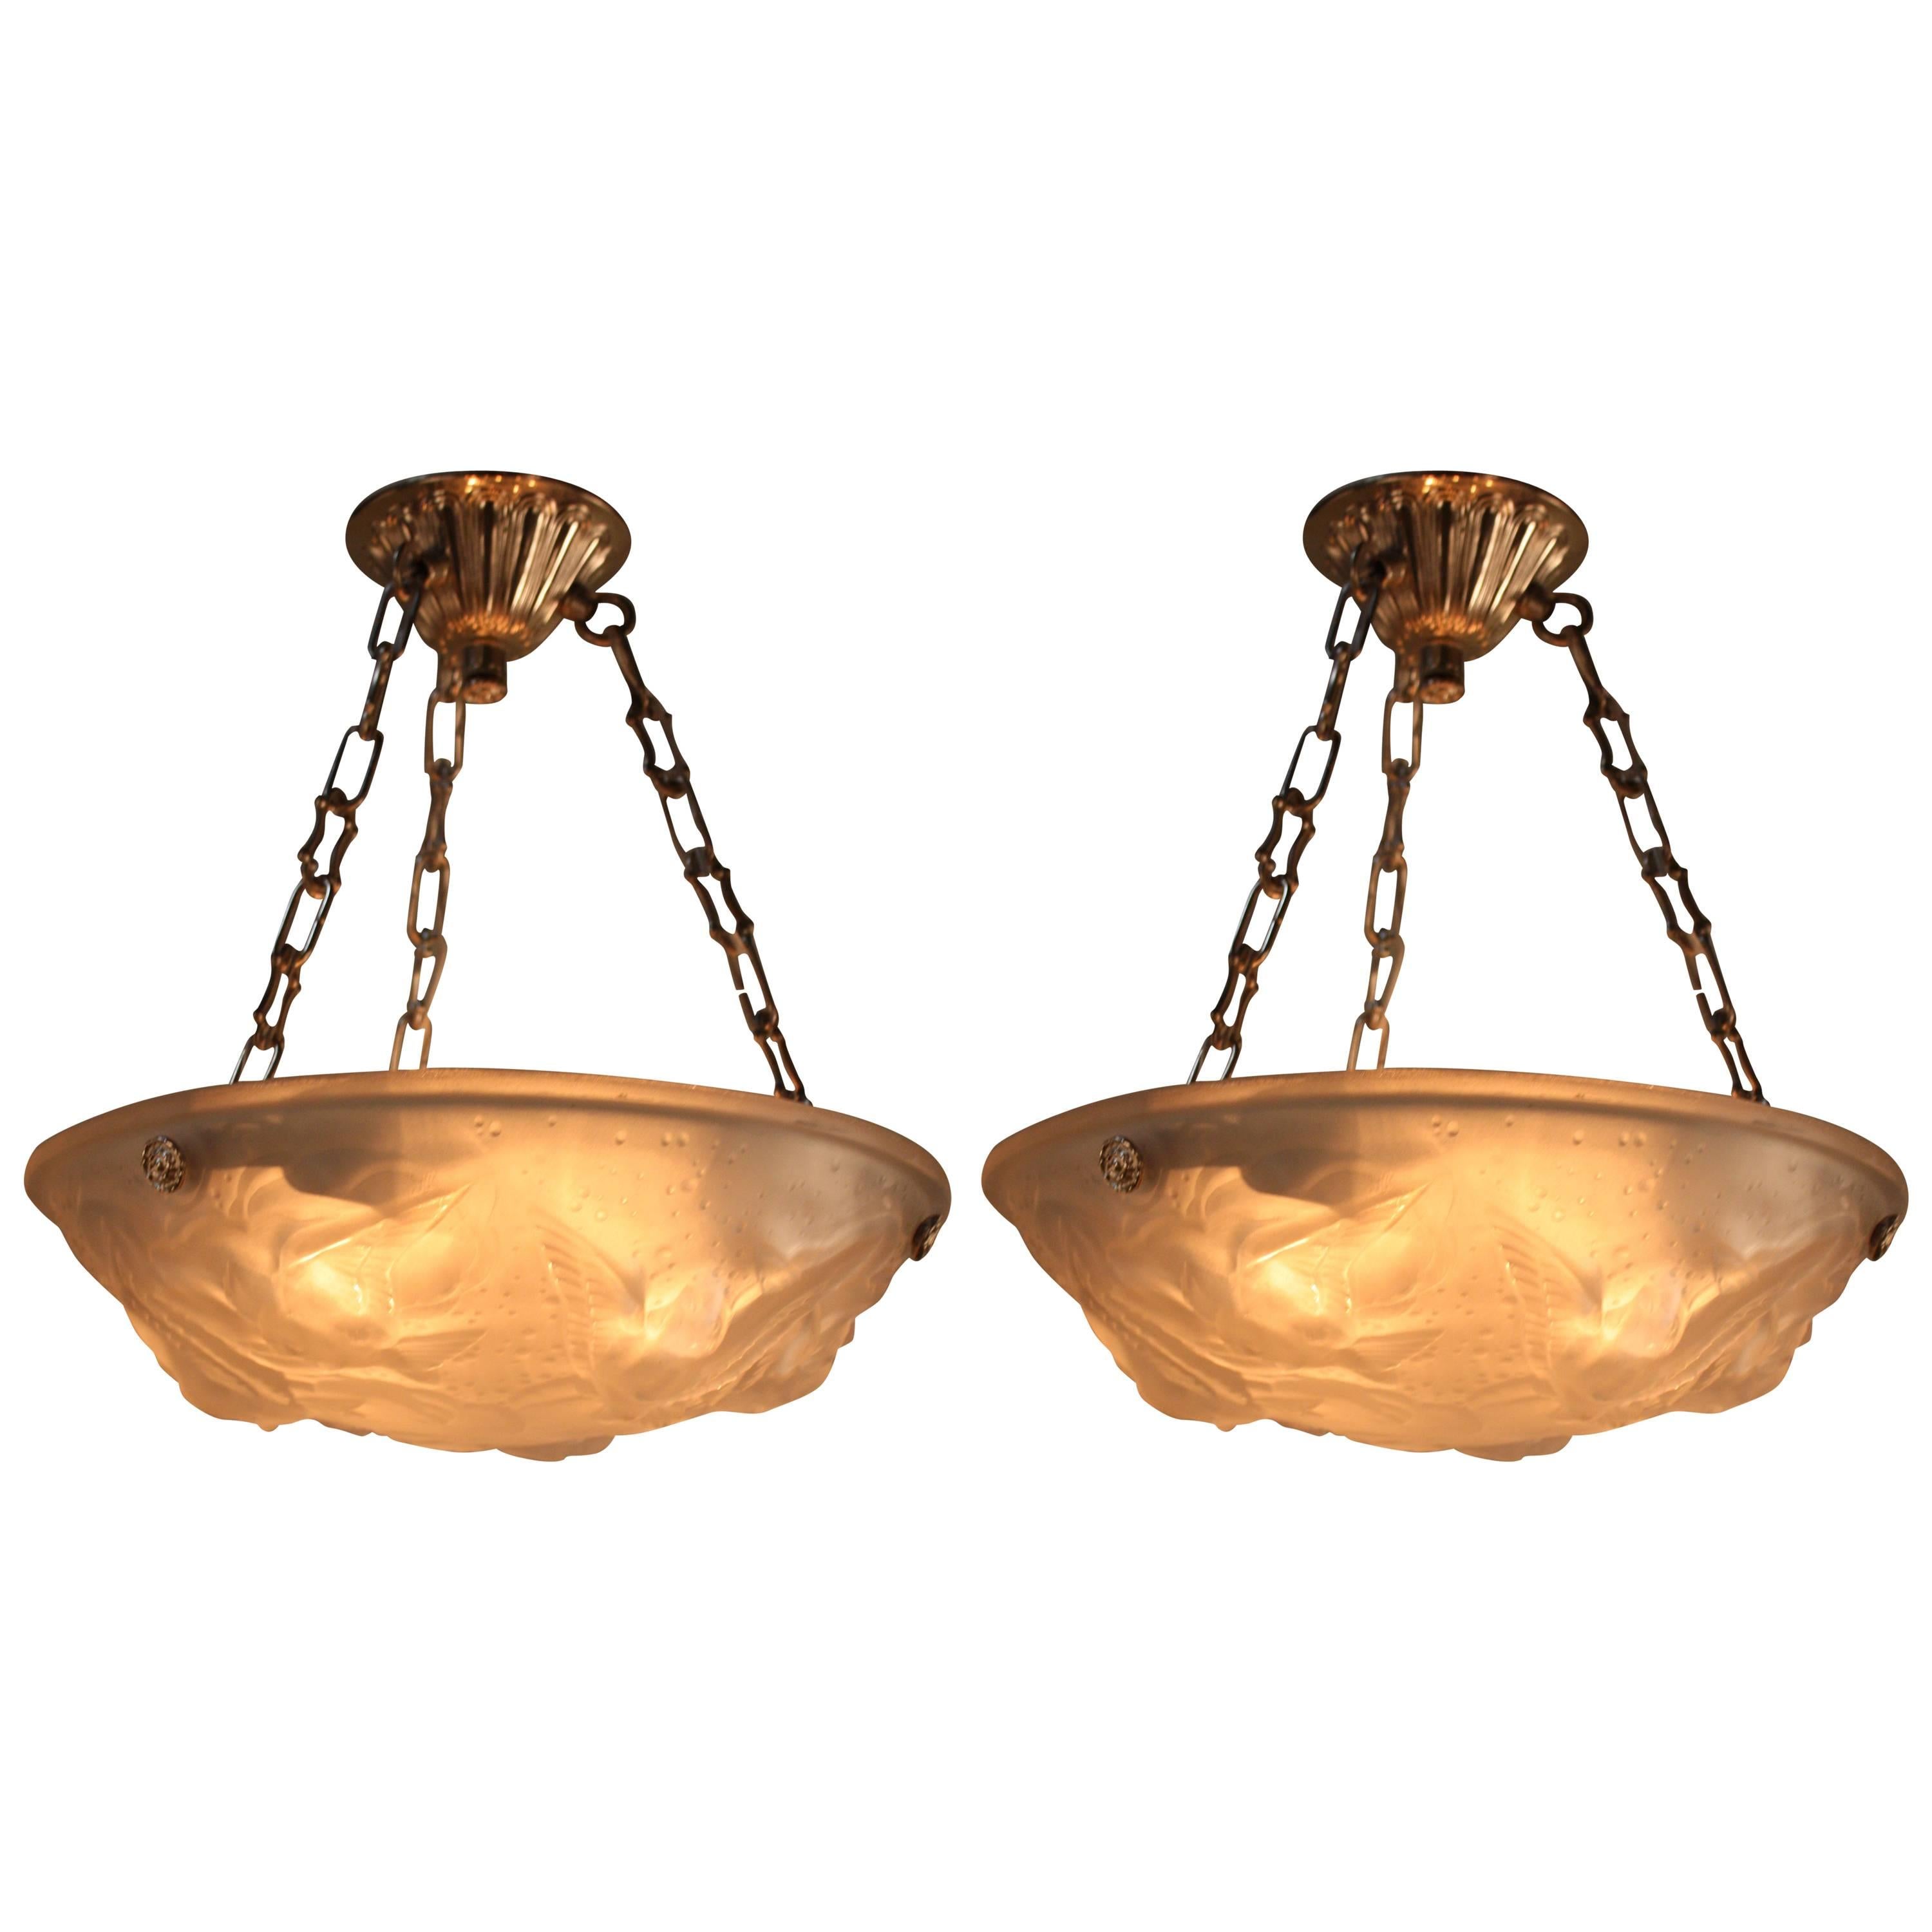 Pair of French Art Deco Flying Bird Pendant Chandeliers by Muller Freres